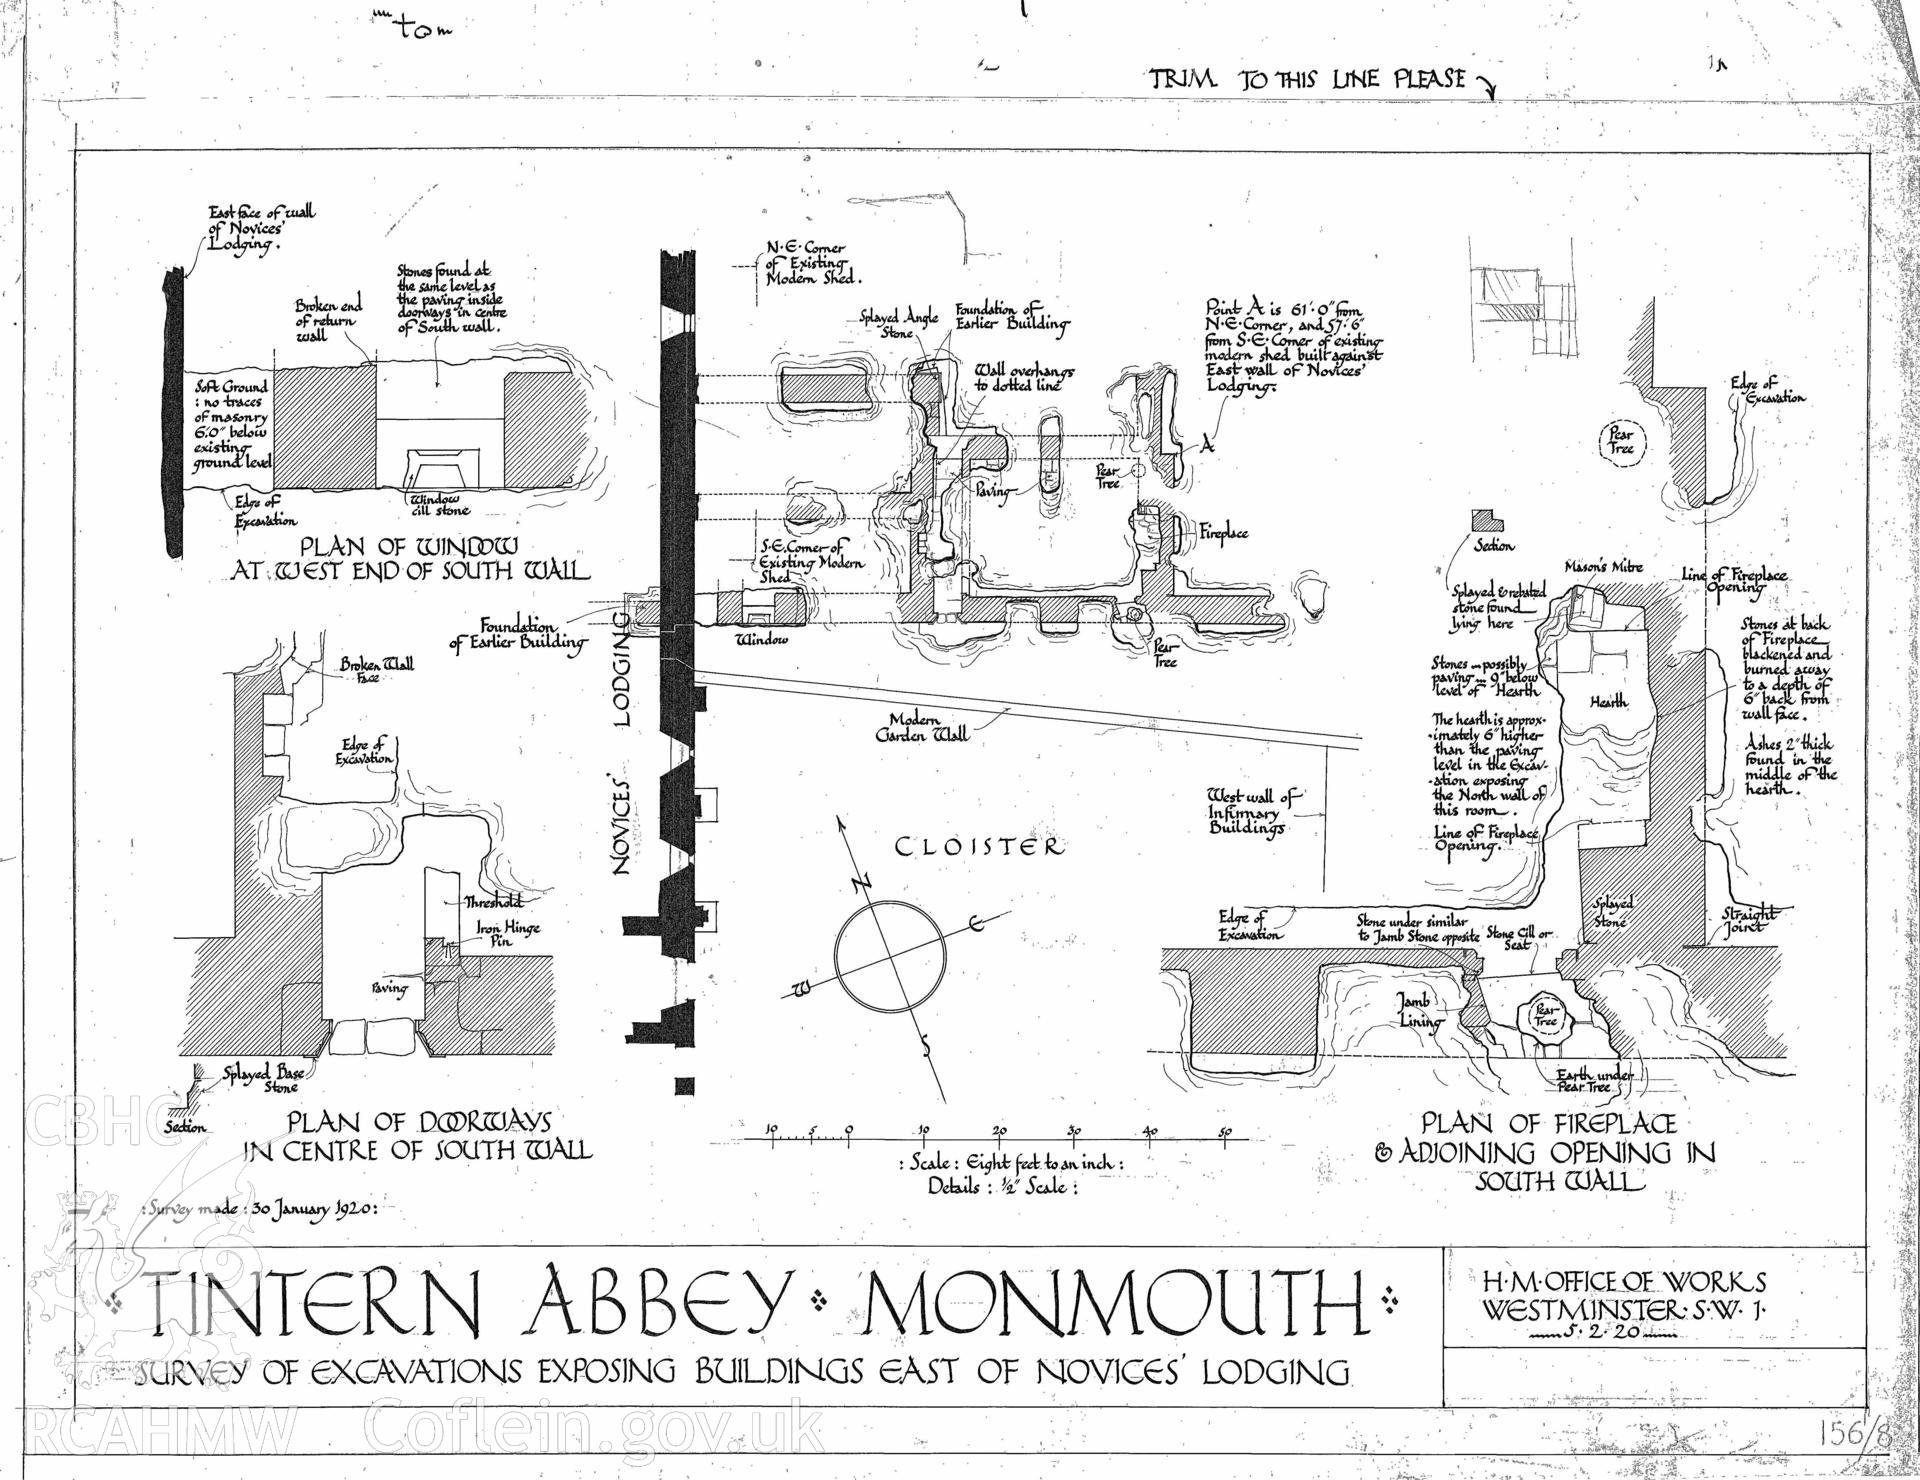 Cadw guardianship monument drawing of Tintern Abbey. Survey of Excavation E of Novices' Lodgings. Cadw ref. No. 156/8. Scale 1:96.